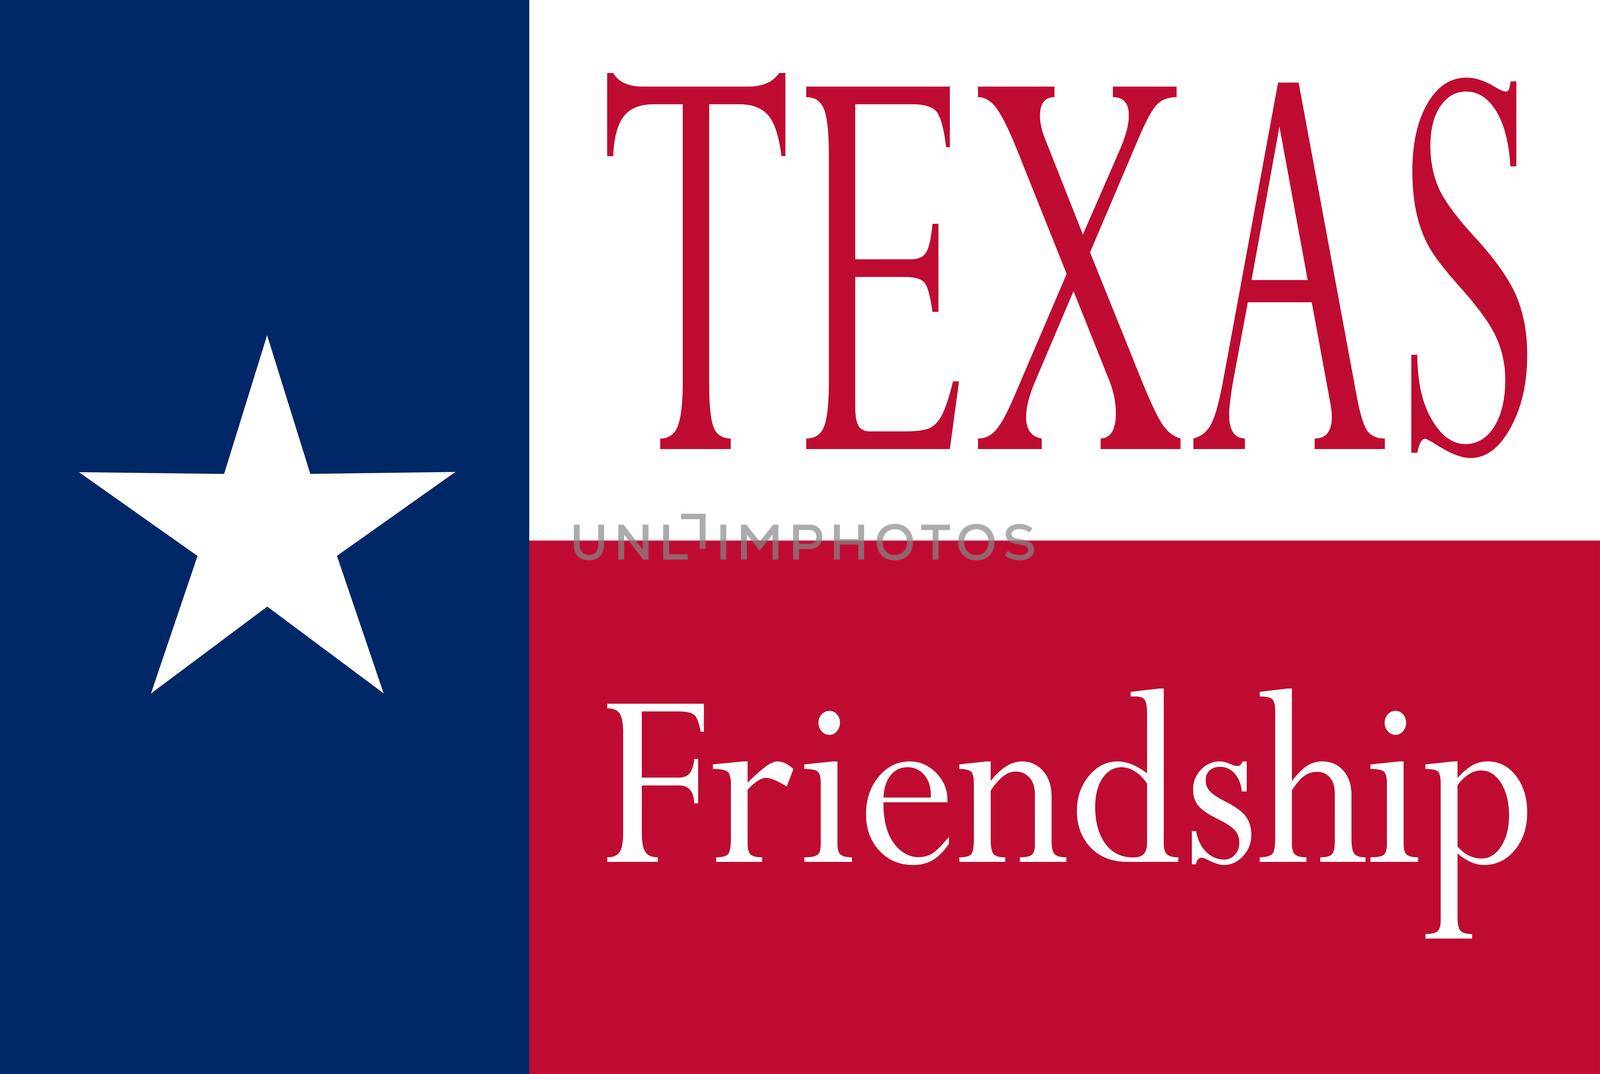 The flag of the USA state of TEXAS with friendship motto